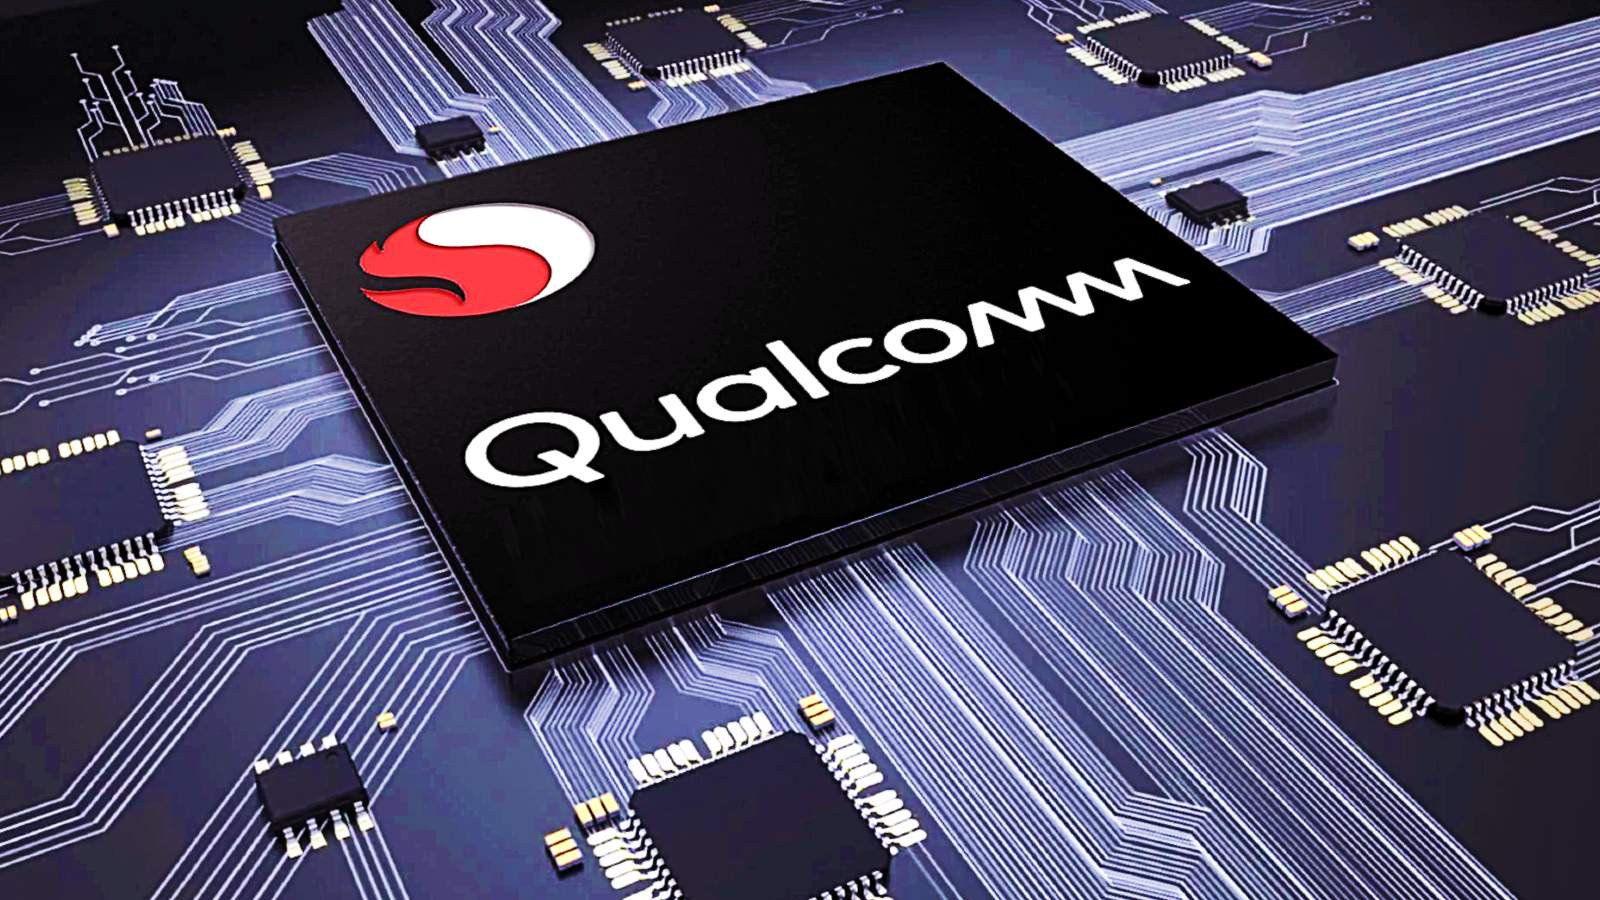 Qualcomm Snapdragon SM6375 is said to be a new SoC for budget gaming smartphones